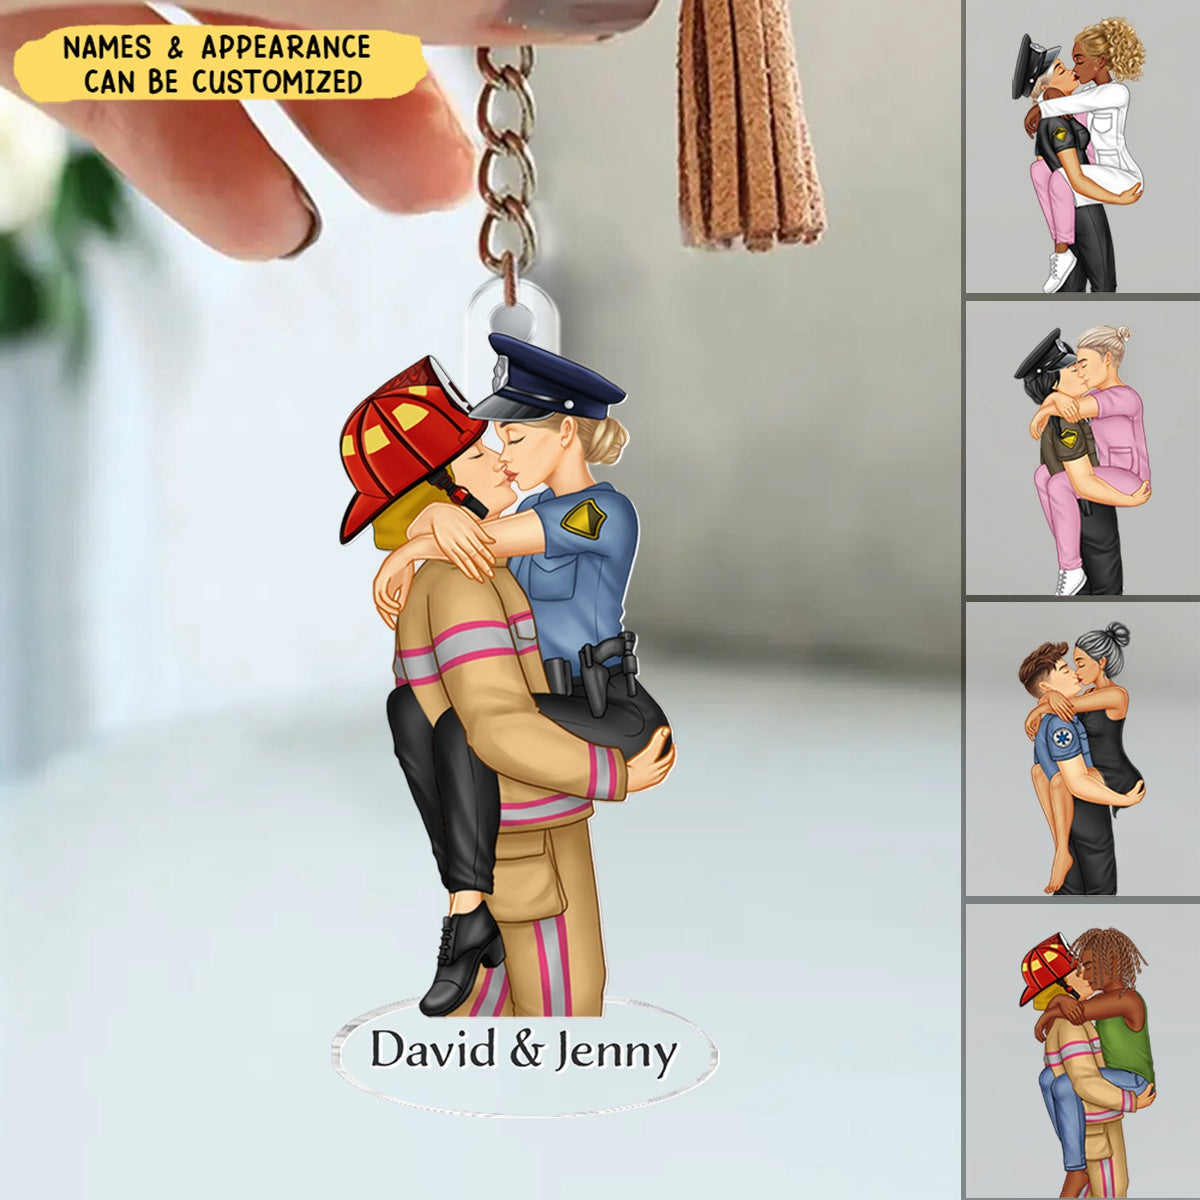 Couple Kissing Occupation - Personalized Acrylic Keychain, Gift For Couples, Nurse, Firefighter, Police Officer